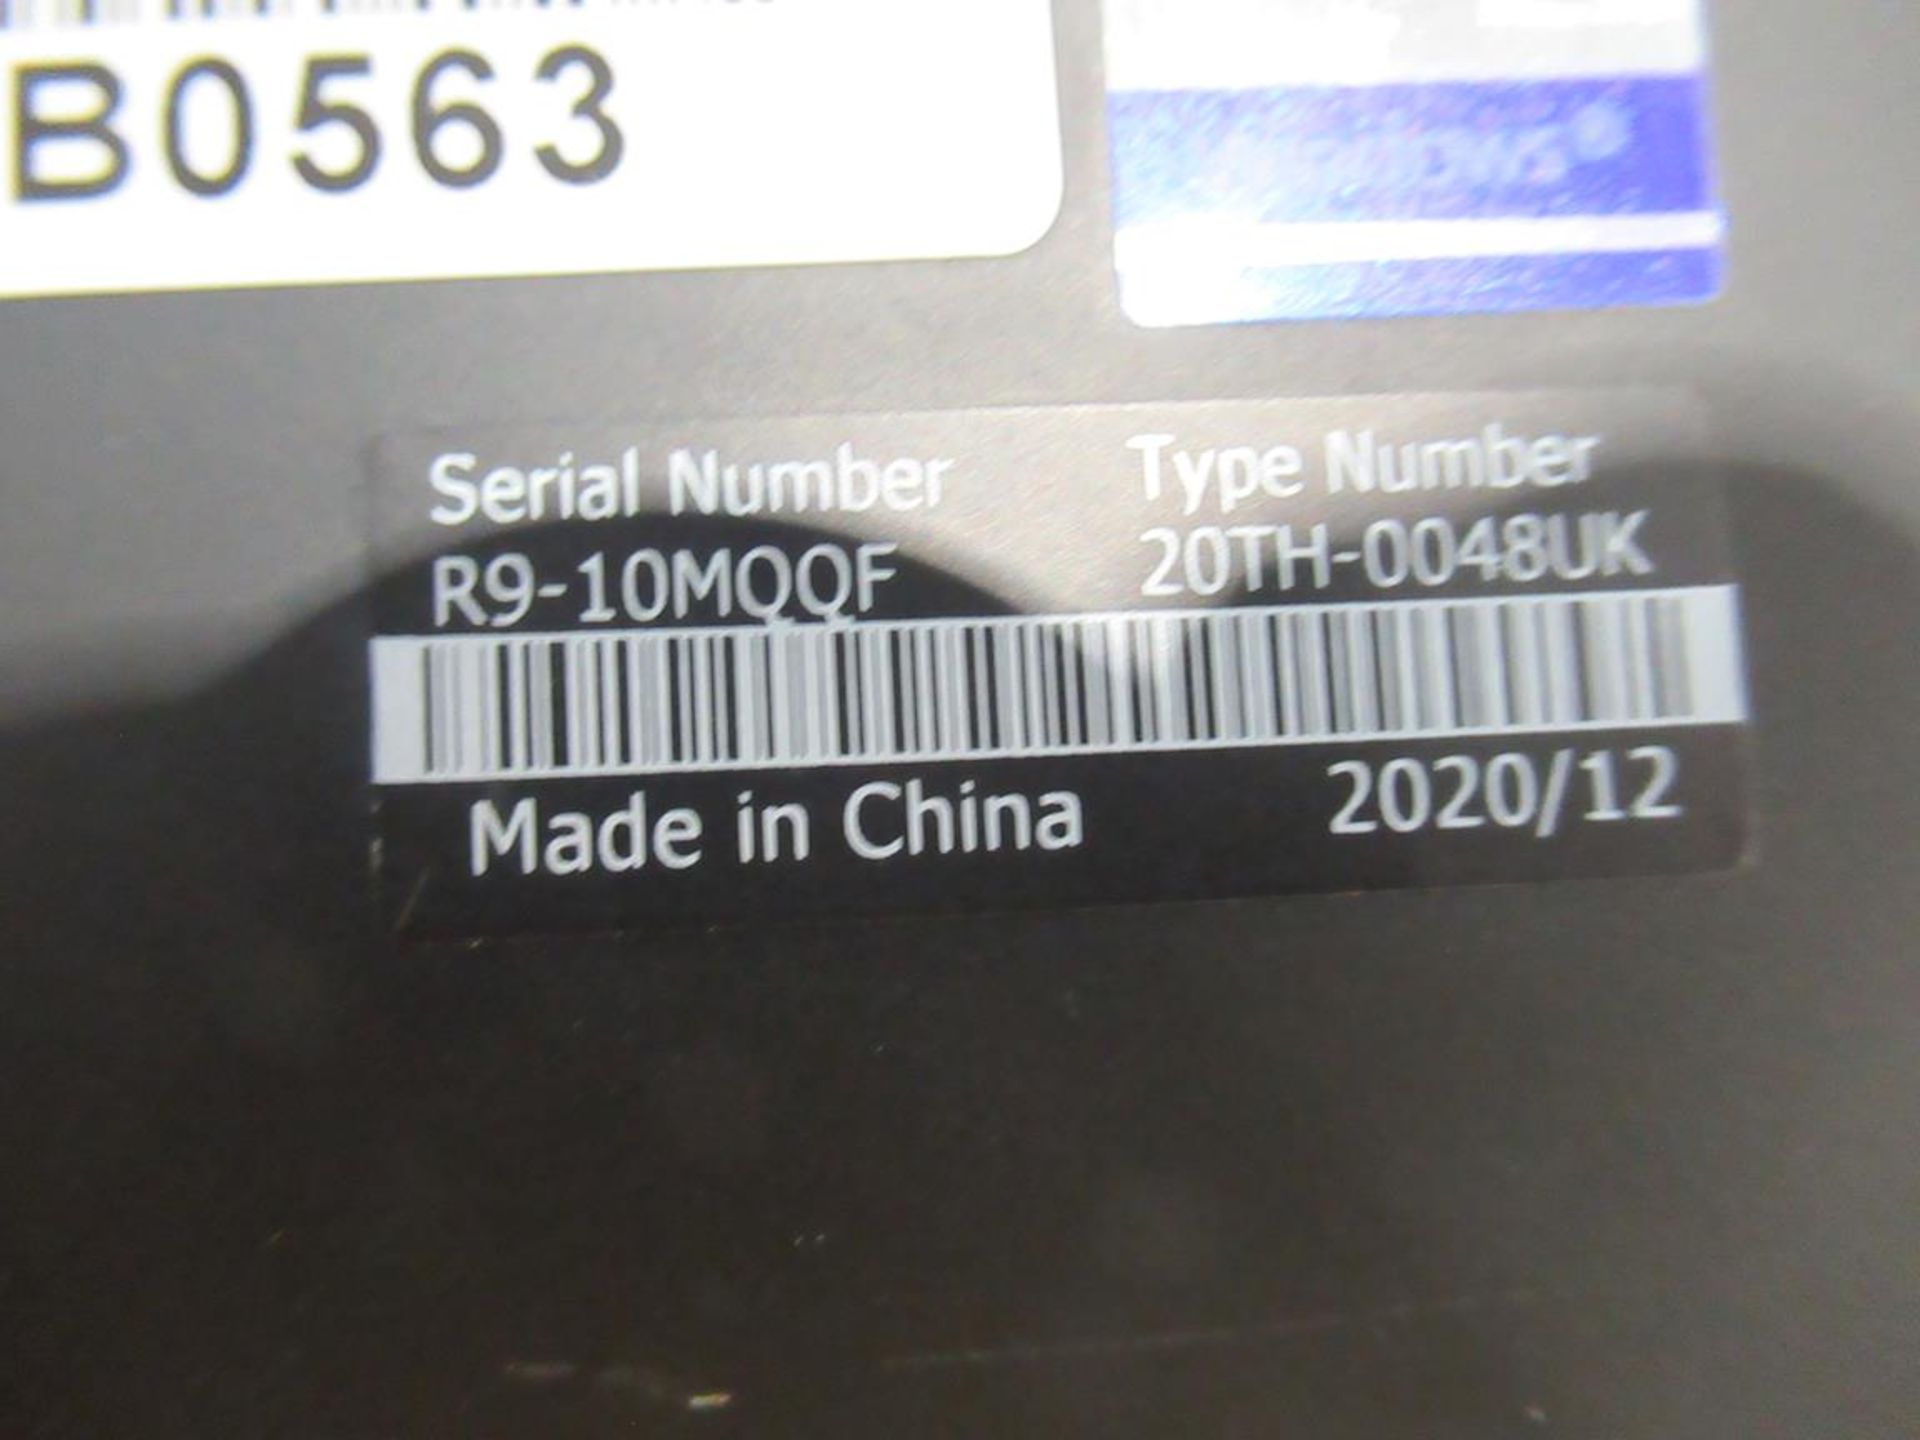 Lenovo, Thinkpad P1 Gen 3 CAD specification (boxed) - Image 5 of 6